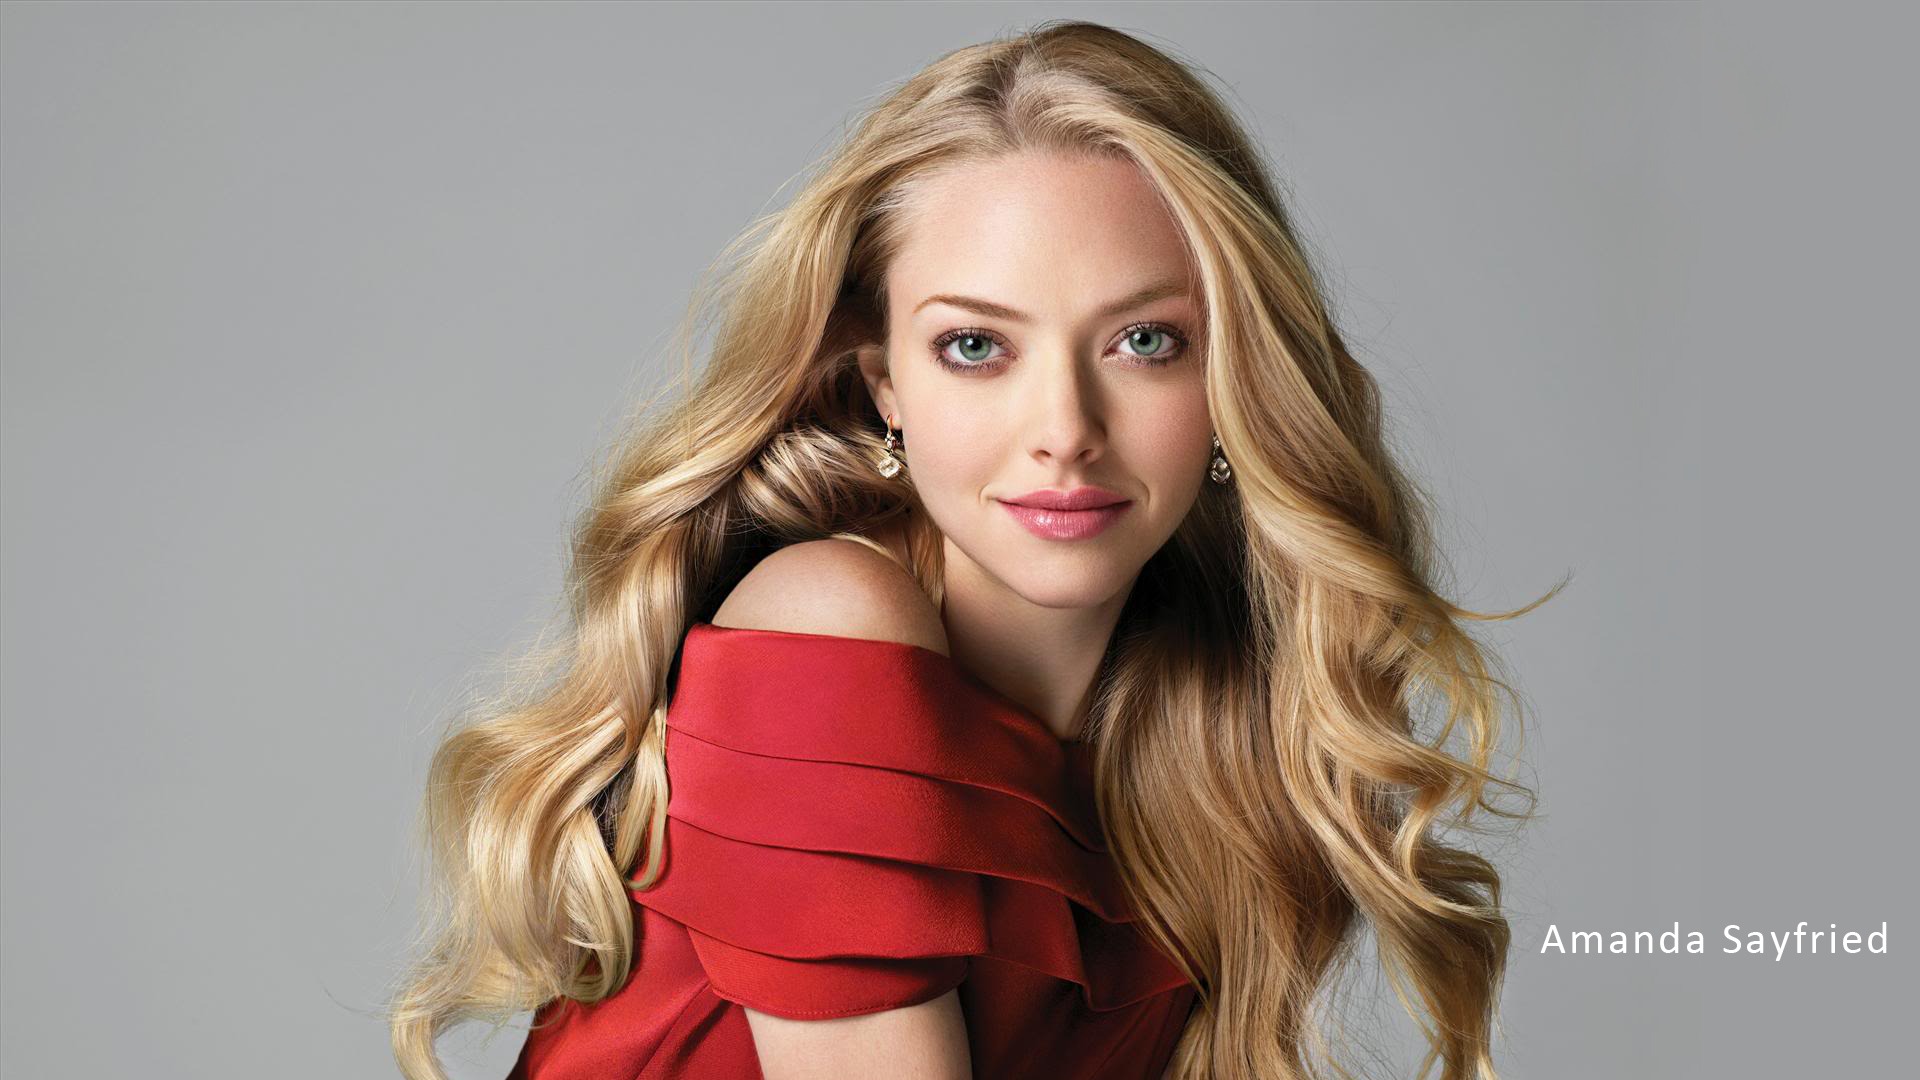 Amanda Seyfried #001 - 1920x1080 Wallpapers Pictures Photos Images